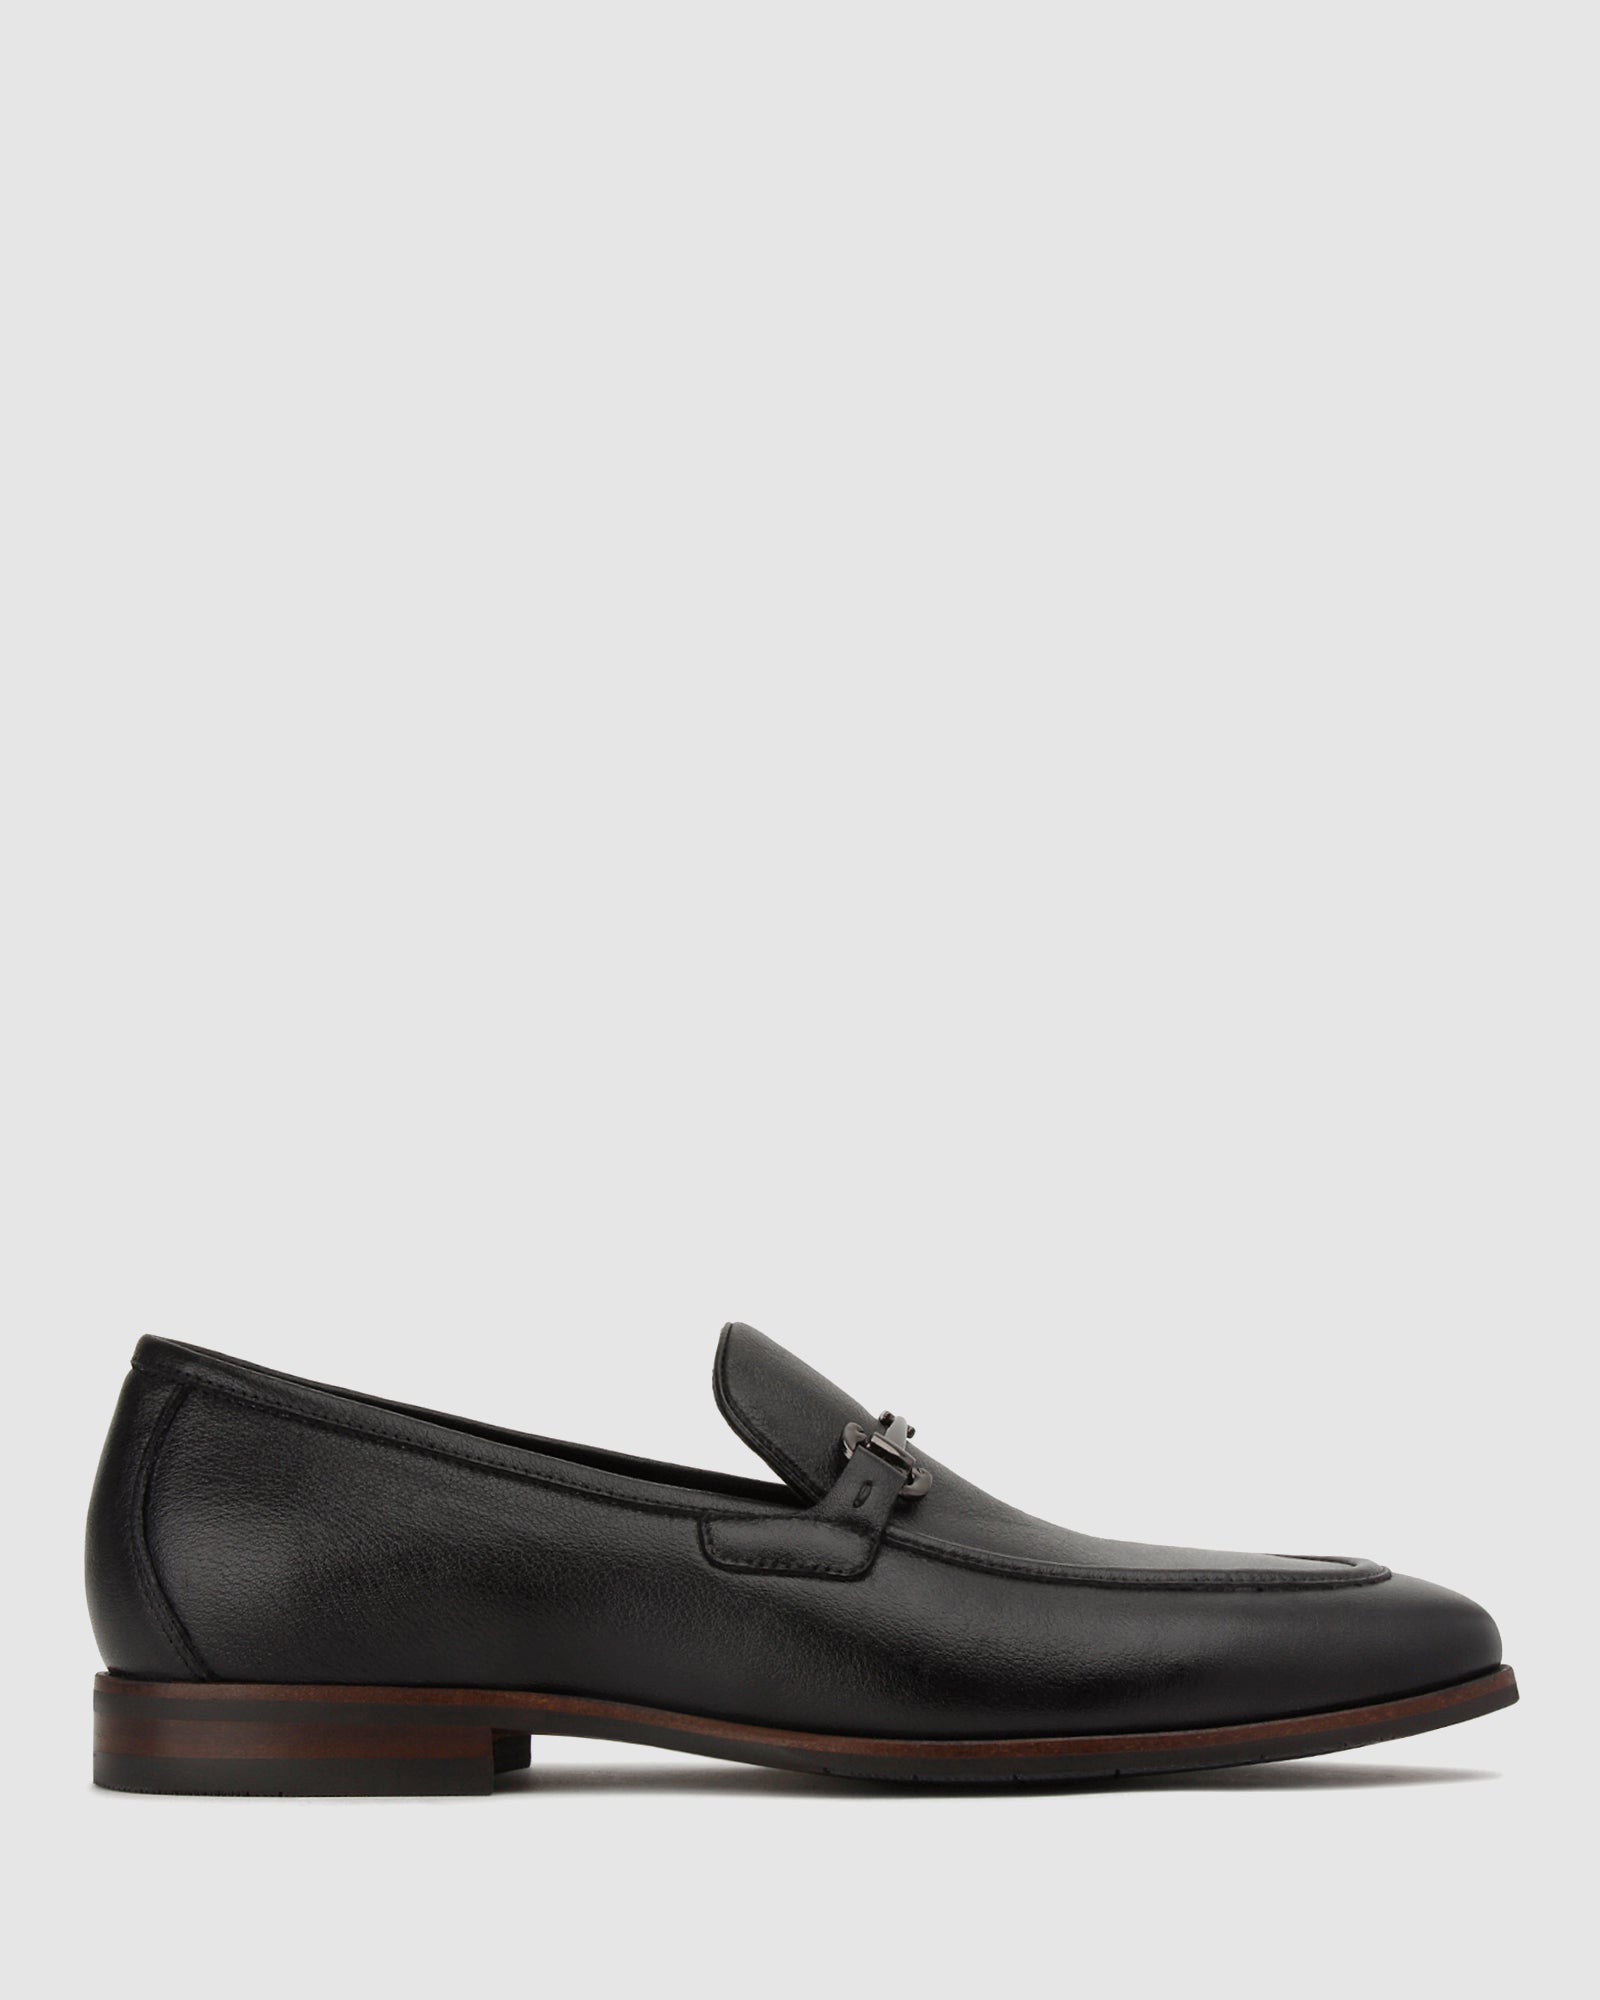 Buy NATE Leather Buckle Trim Loafers by Dakota online - Betts